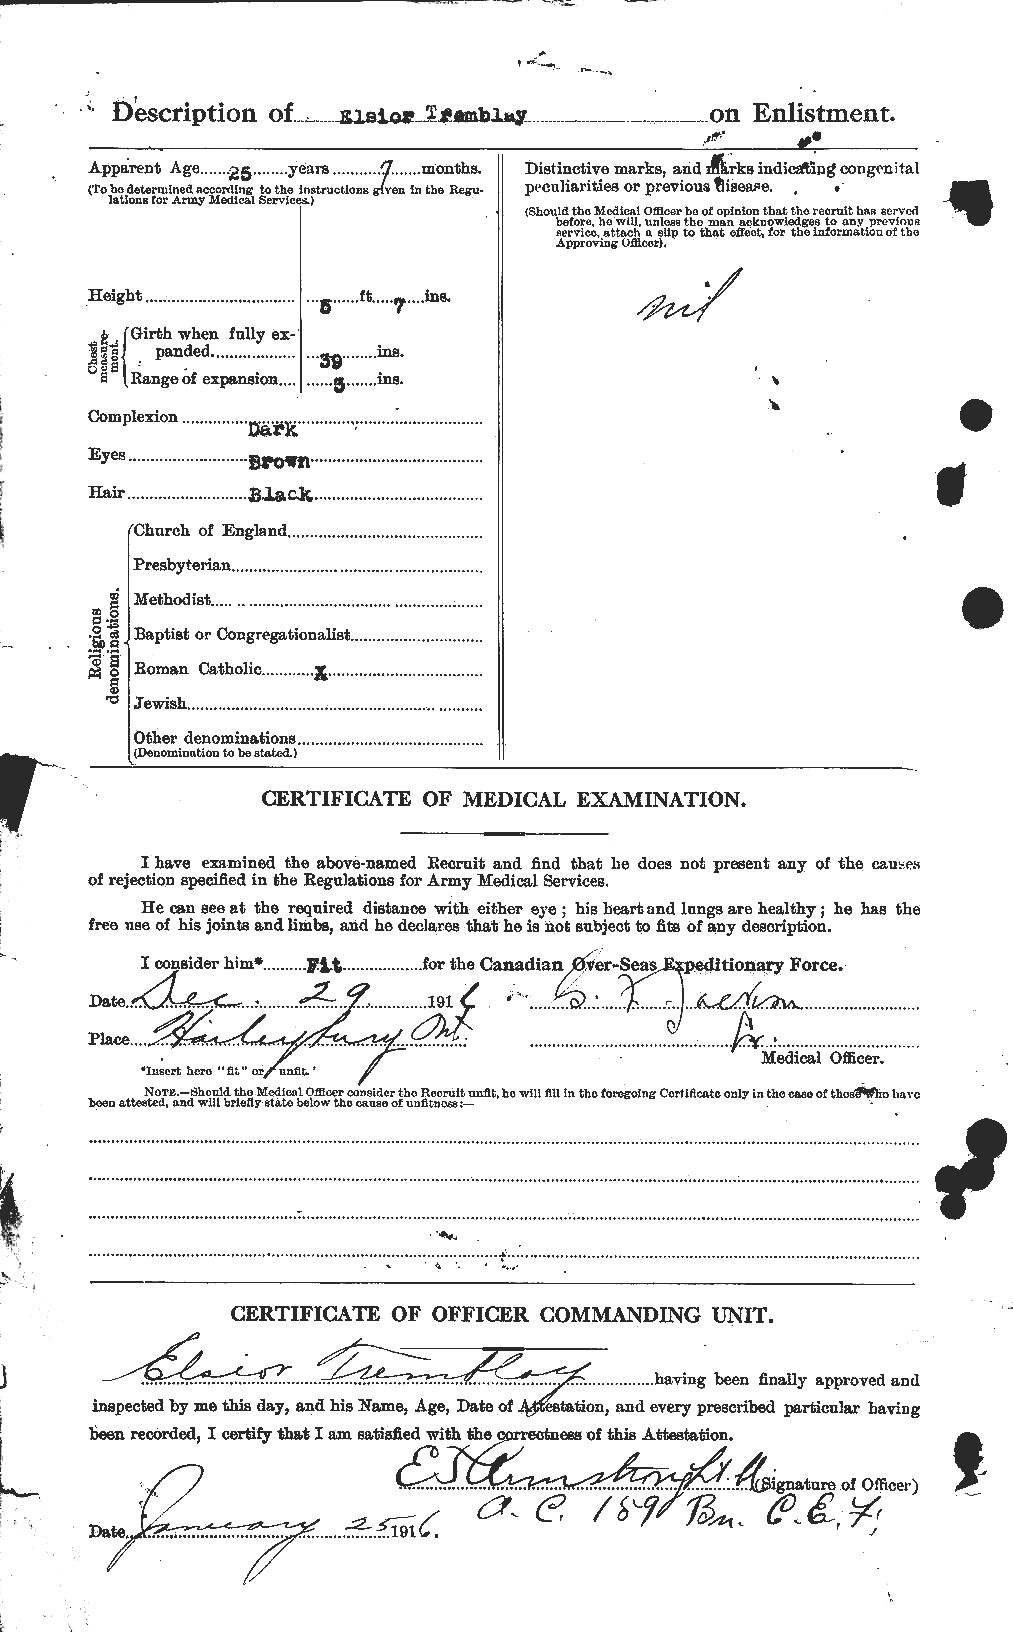 Personnel Records of the First World War - CEF 639013b